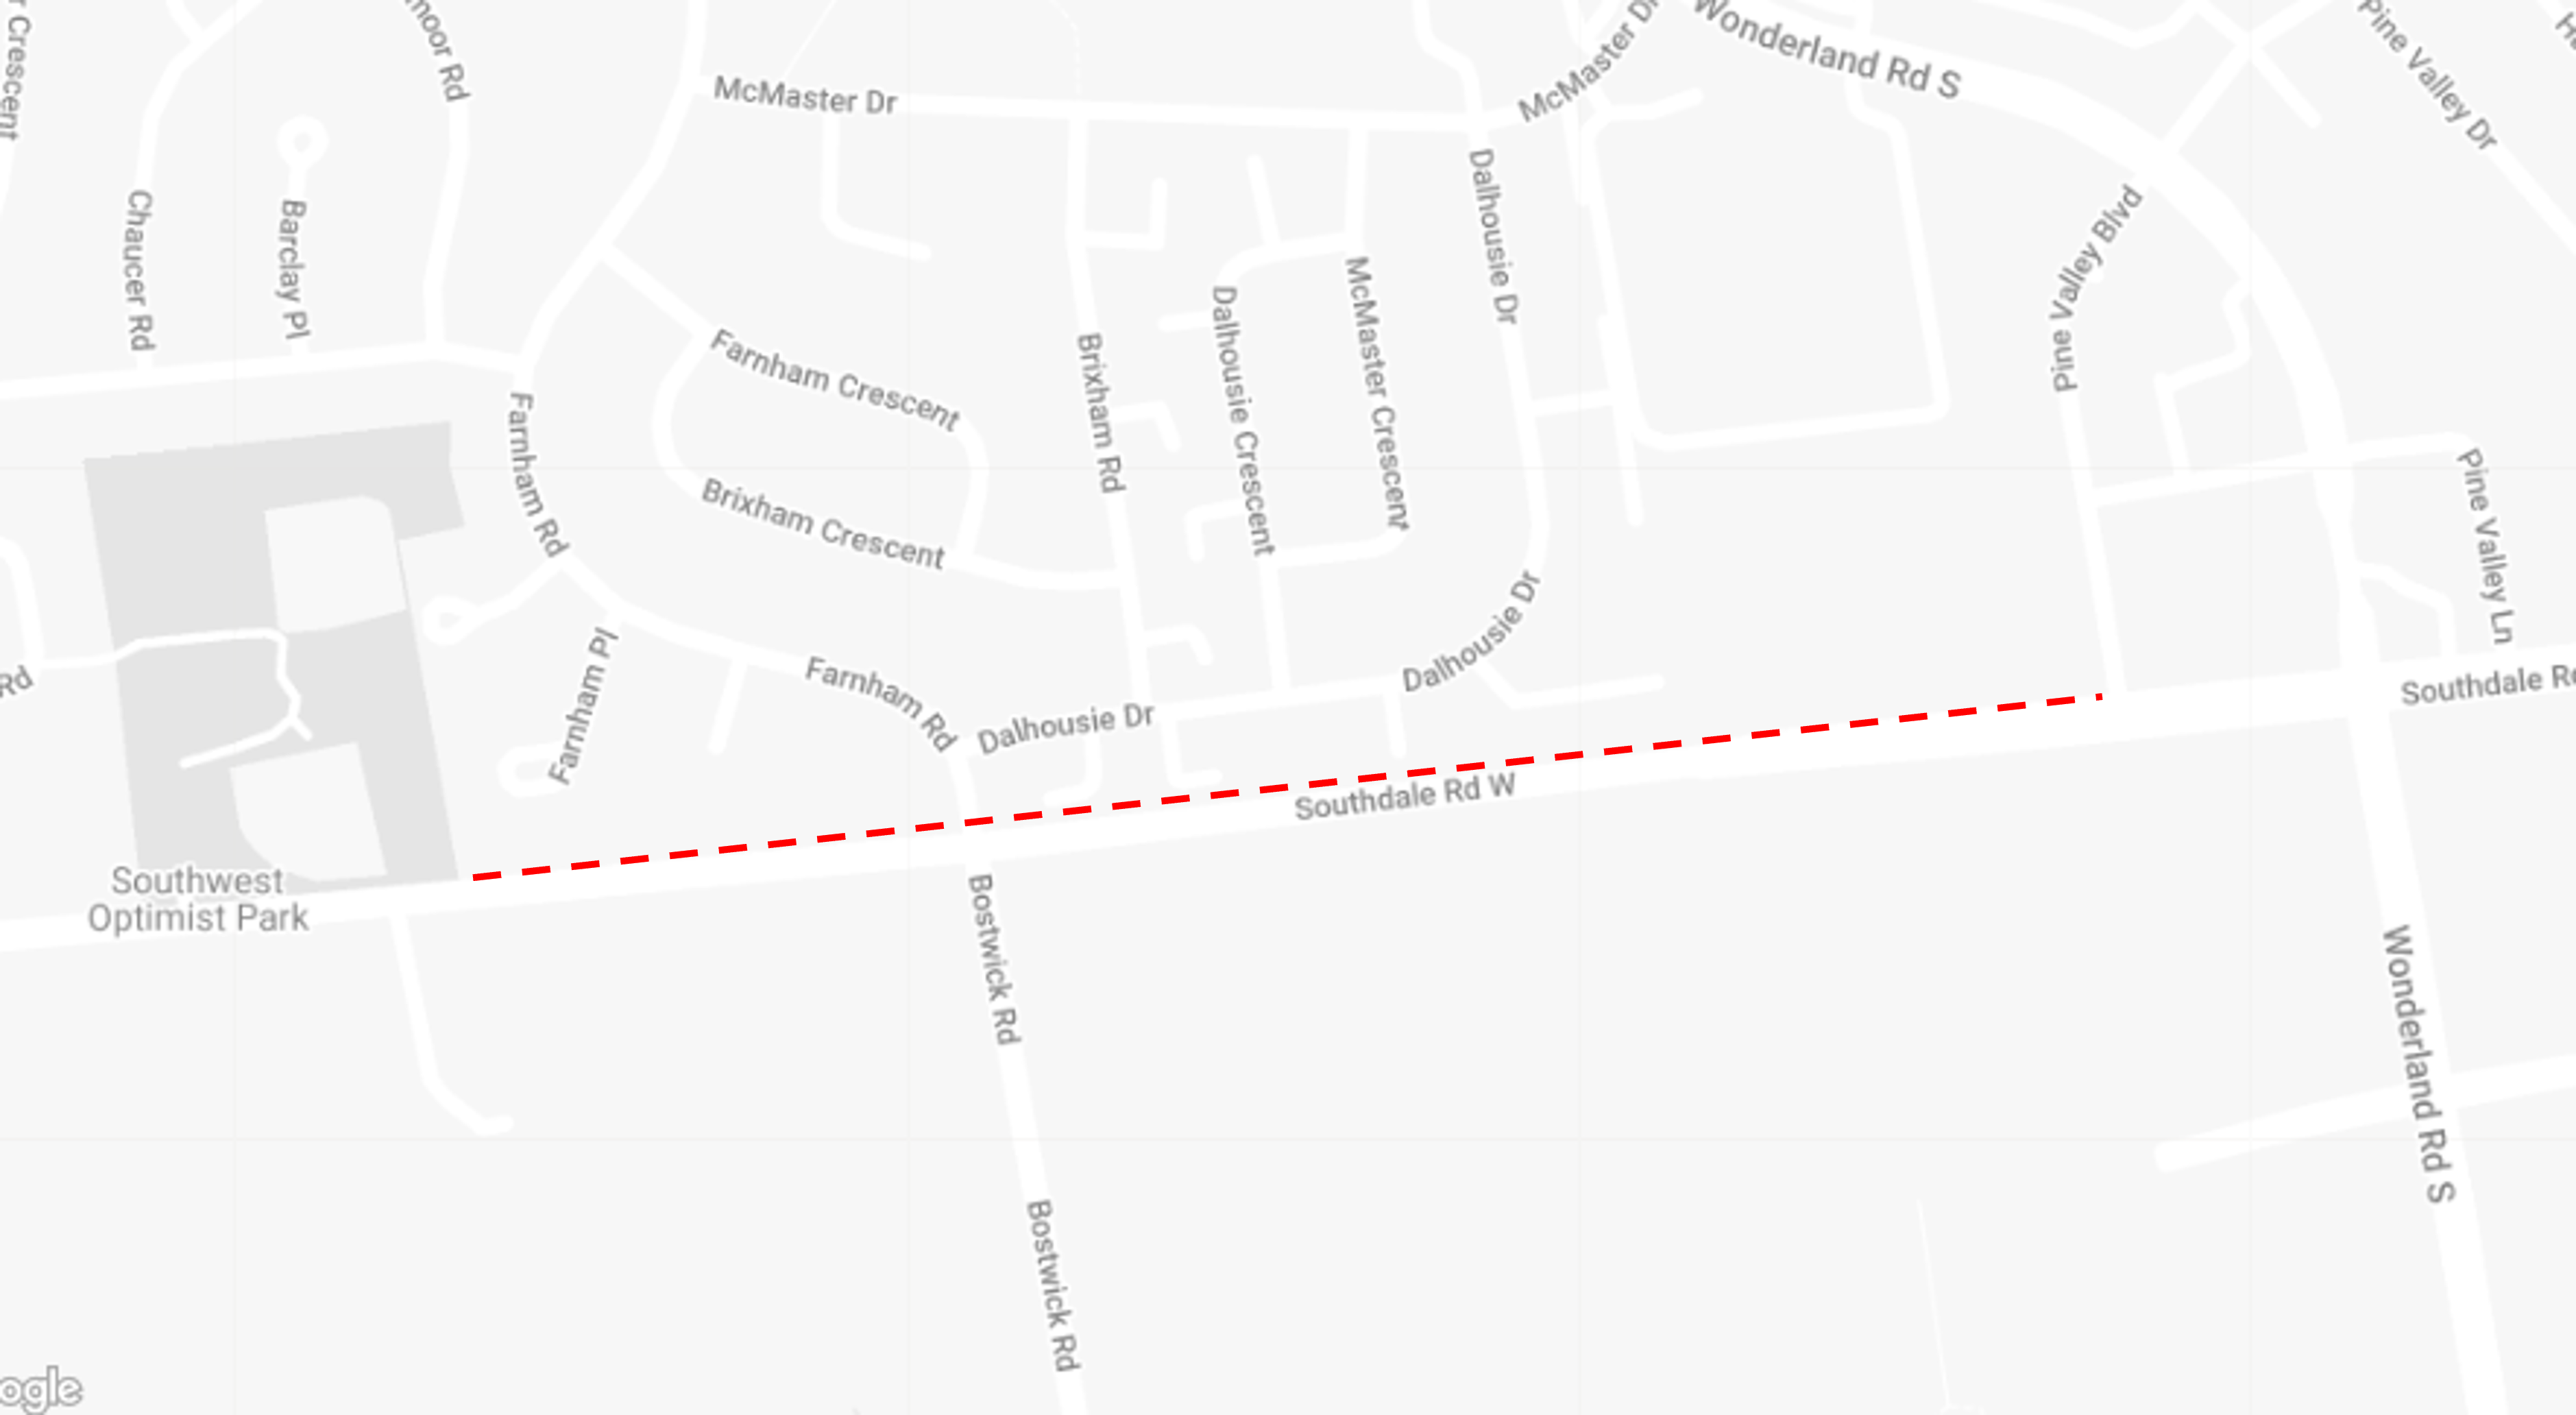 A map of the Southdale Road West lane restrictions from west of Bostwick Road to Wonderland Road South.